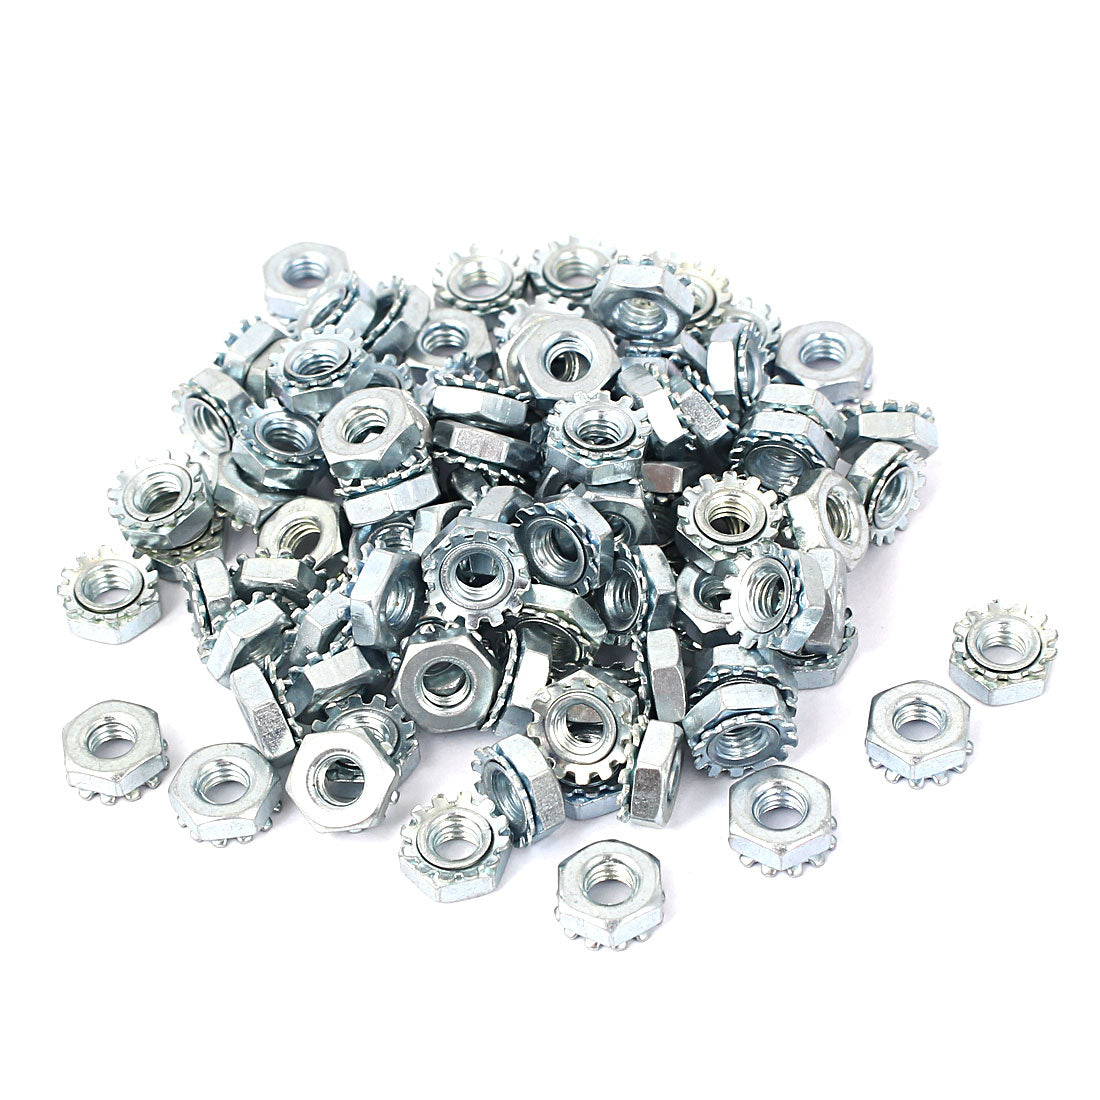 uxcell Uxcell 10#-32 Female Thread Zinc Plated Kep Hex Star Lock Nut 100pcs